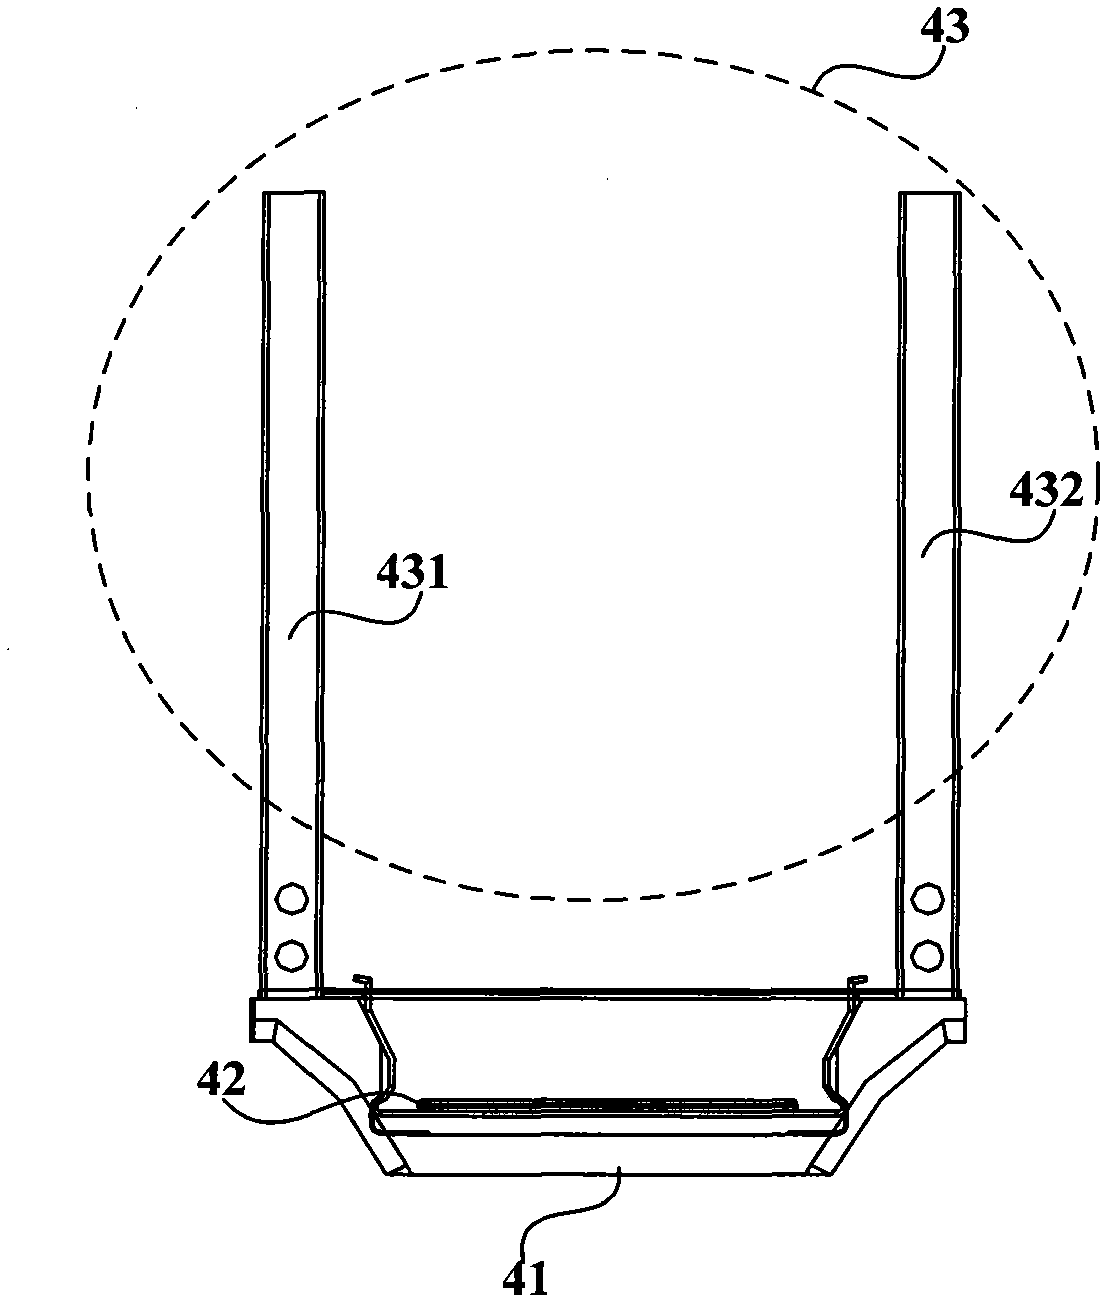 Flashboard device, frame and case of large-scale communication equipment